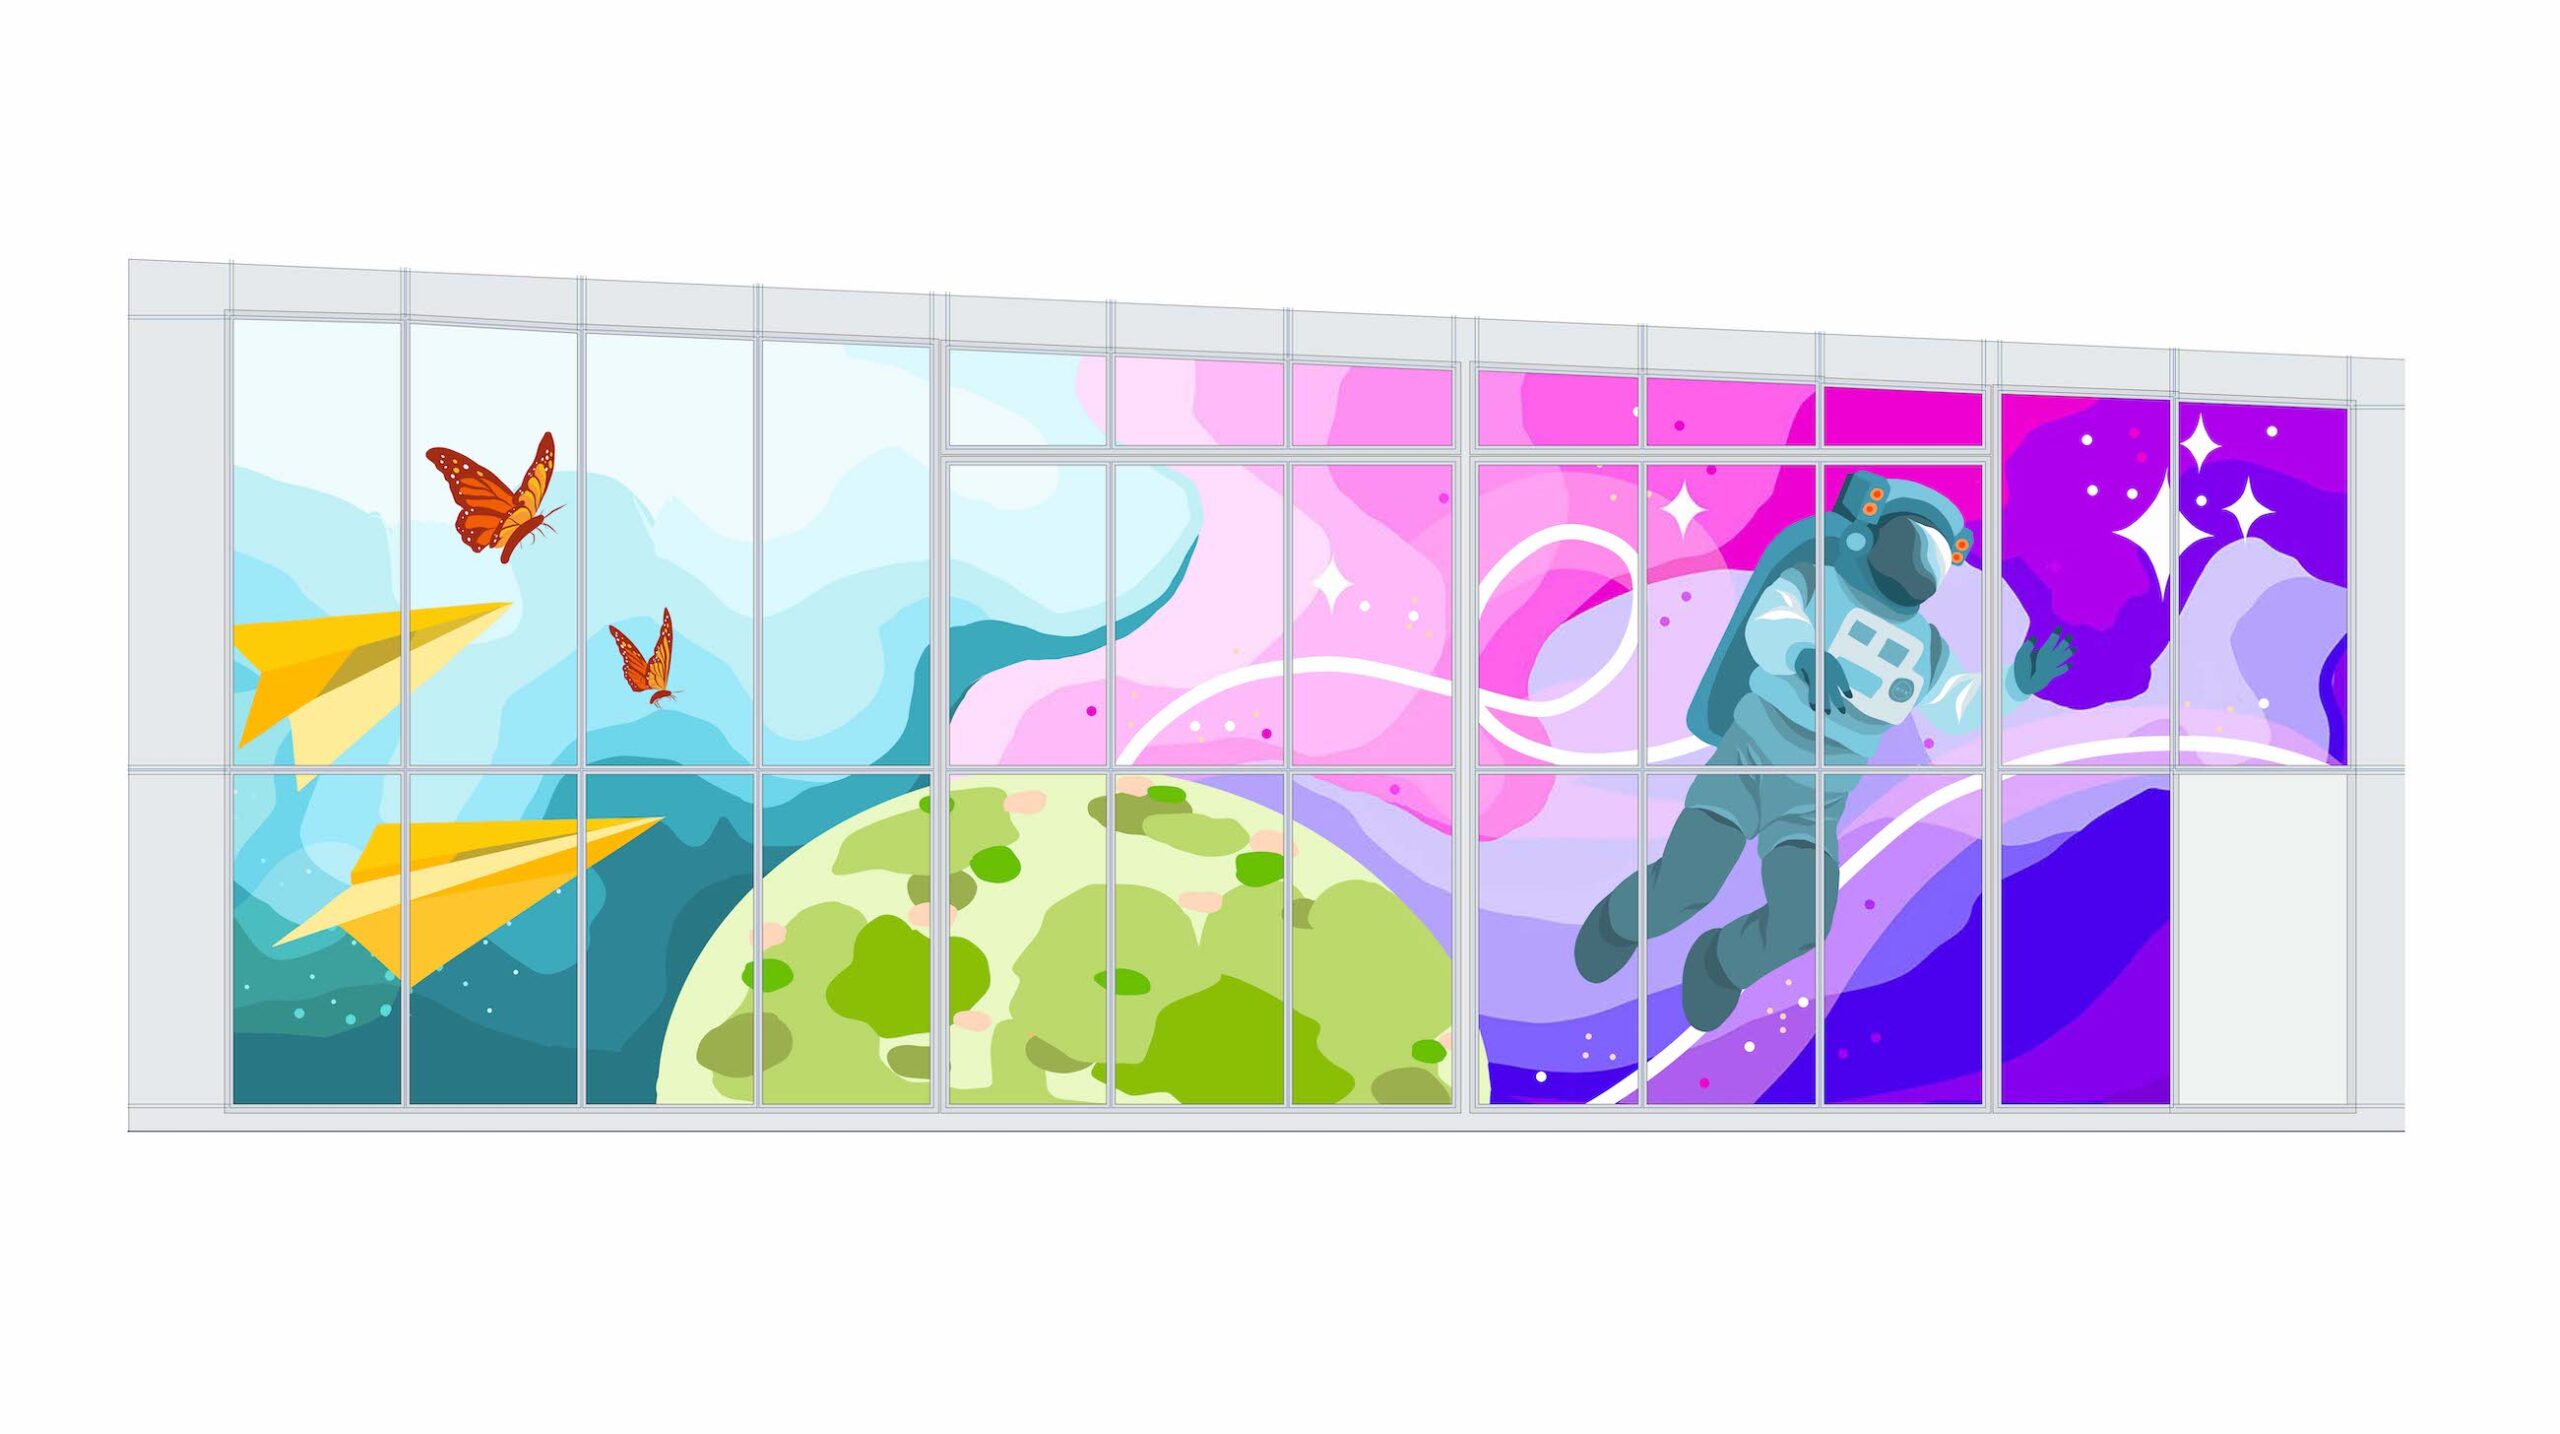 A digital mockup of a mural depicting a girl running with an airplane surrounded by butterflies and paper airplanes.